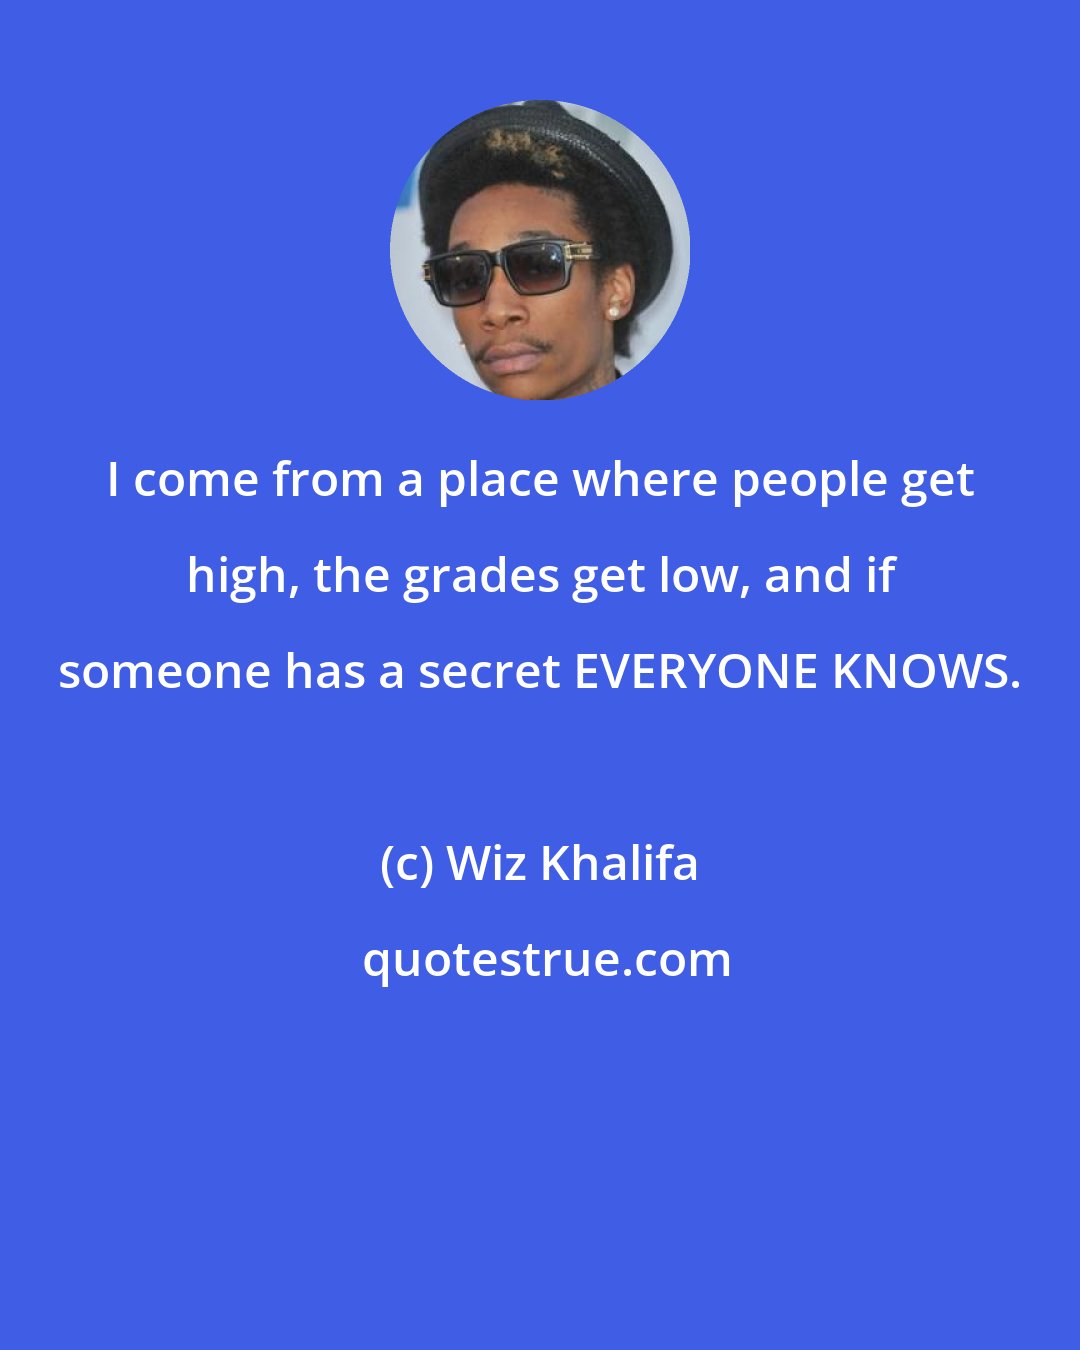 Wiz Khalifa: I come from a place where people get high, the grades get low, and if someone has a secret EVERYONE KNOWS.